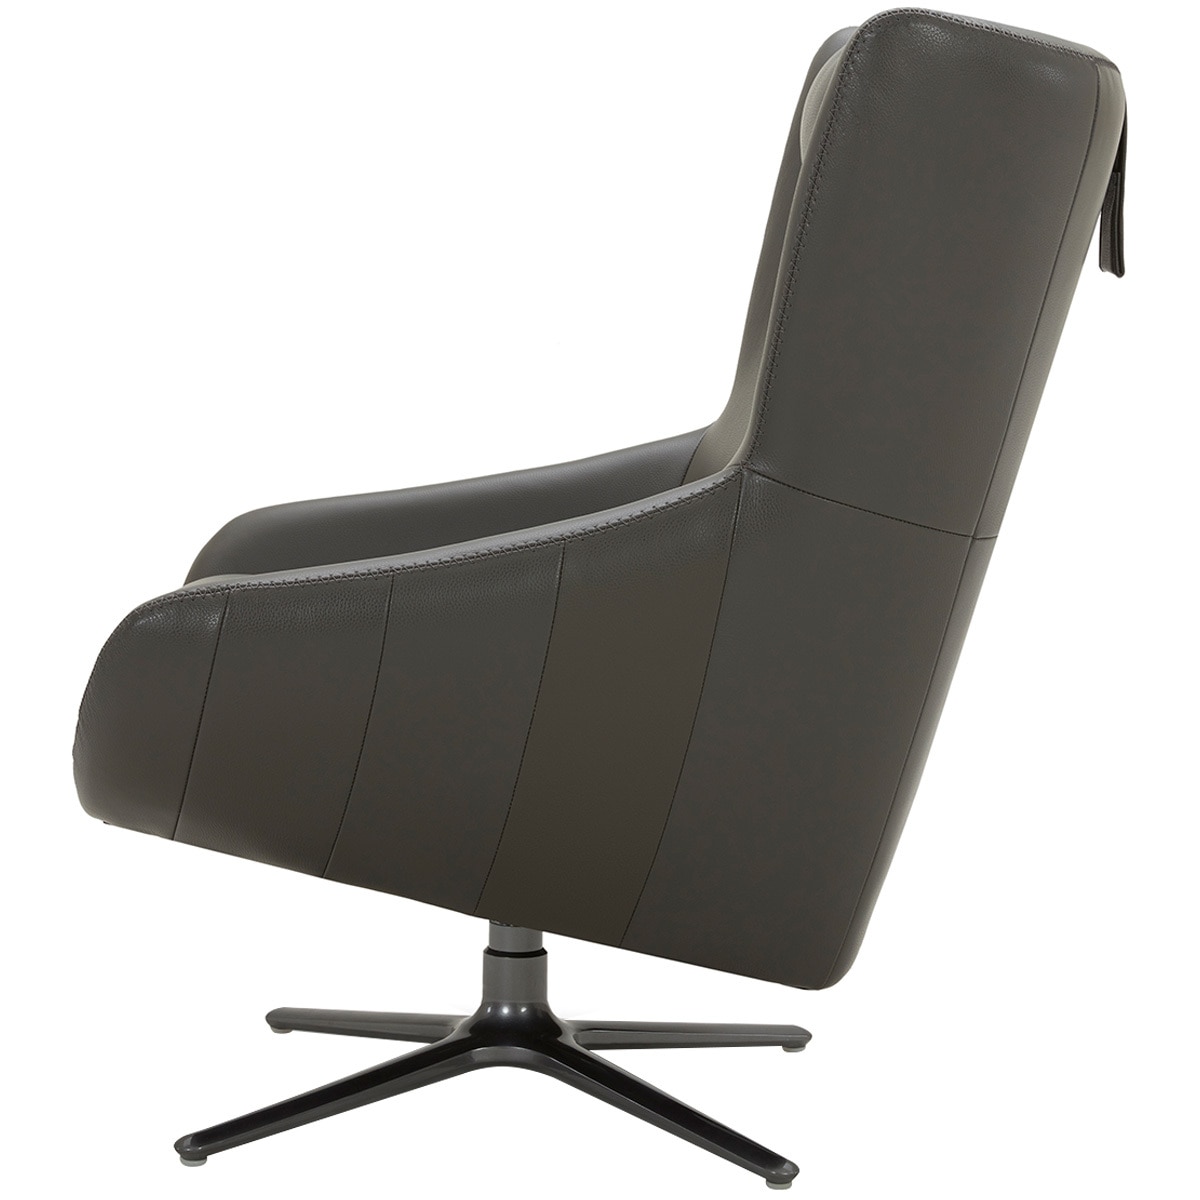 Kuka Leather Swivel Accent Chair - Brown